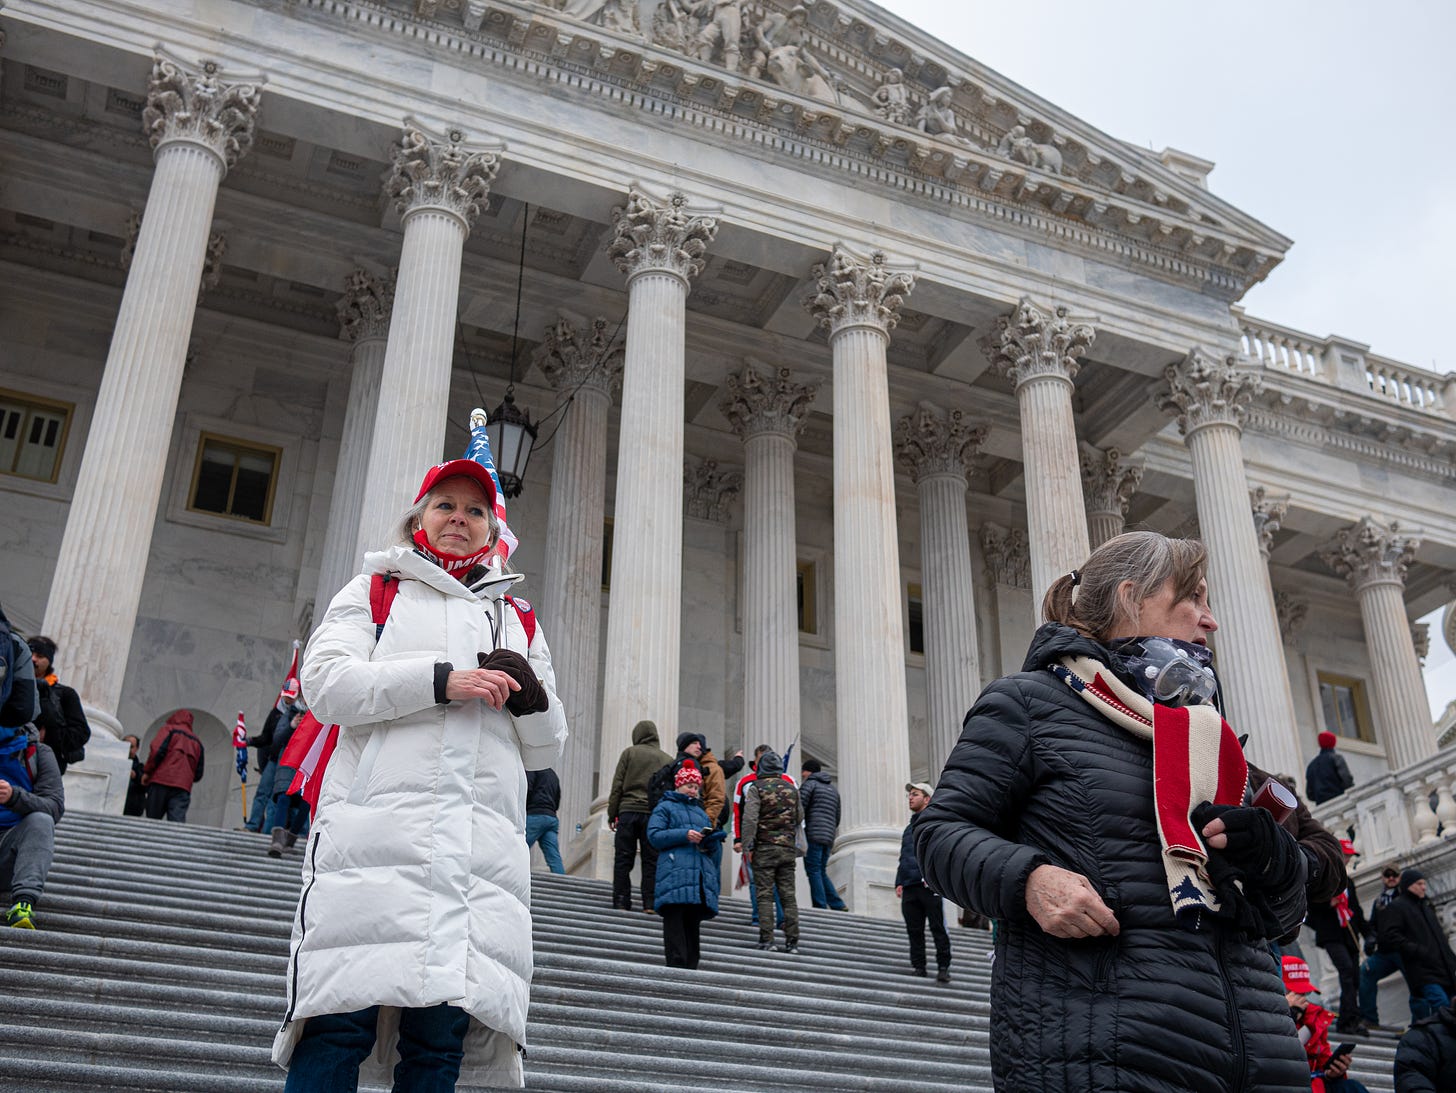 A woman in a long white down coat and red "Make America Great Again" hat stands on the steps of the US Capitol on Jan 6, 2021. A red "Trump" mask hangs from her chin and a US flag attached to a short flag pole rests on her left shoulder. She is older, with grey hair, and she looks off into the distance as others are randomly gathered on the steps.